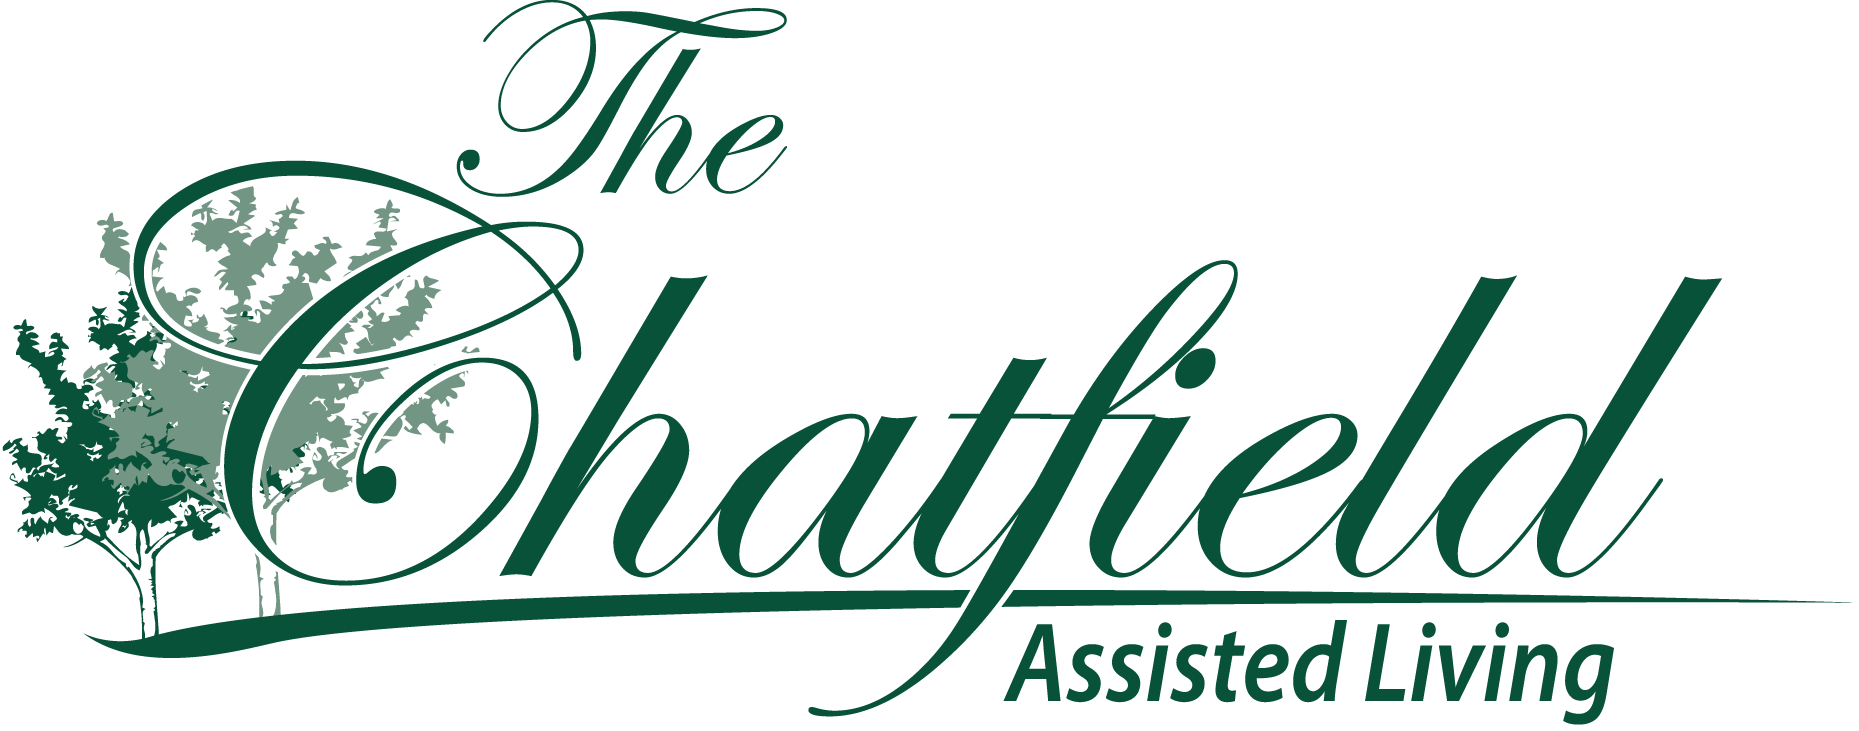 The Chatfield Assisted Living